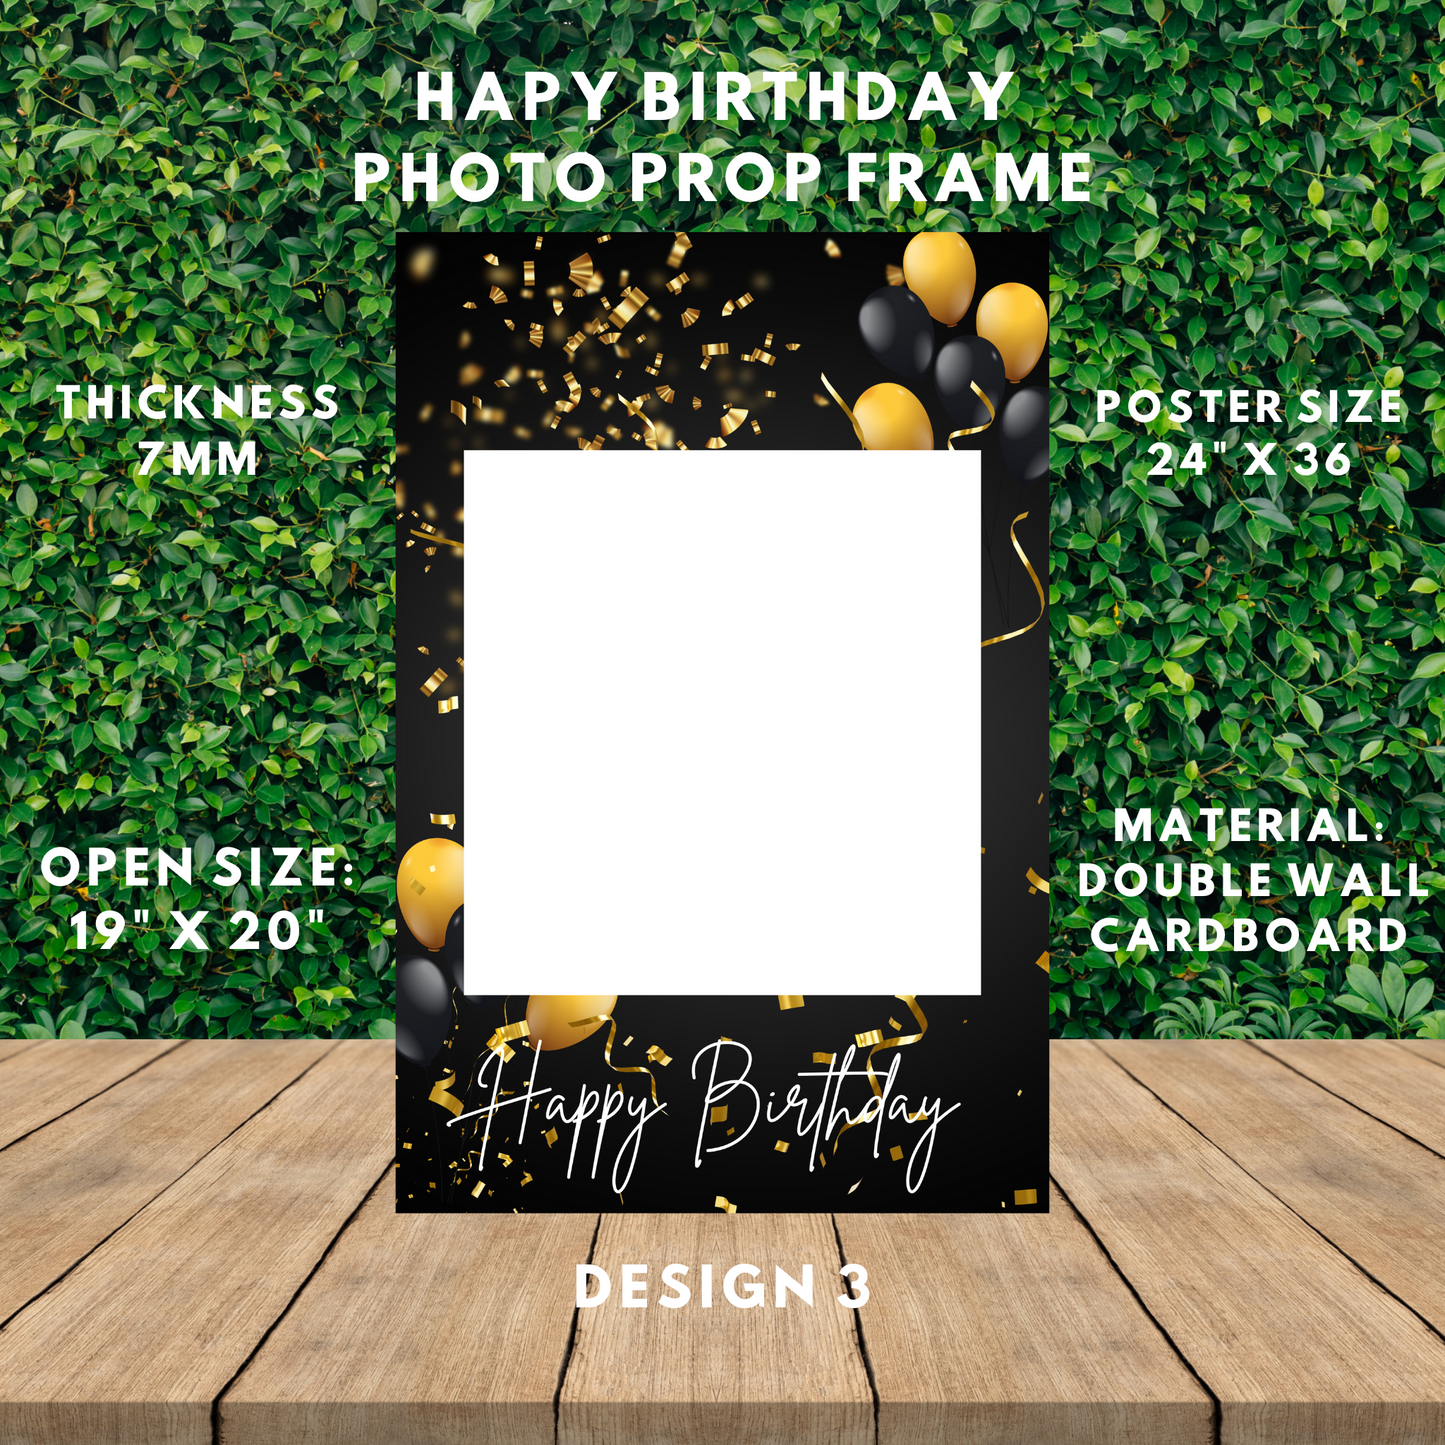 Happy Birthday Photo Prop Frame, Made Out of White Cardboard 7mm